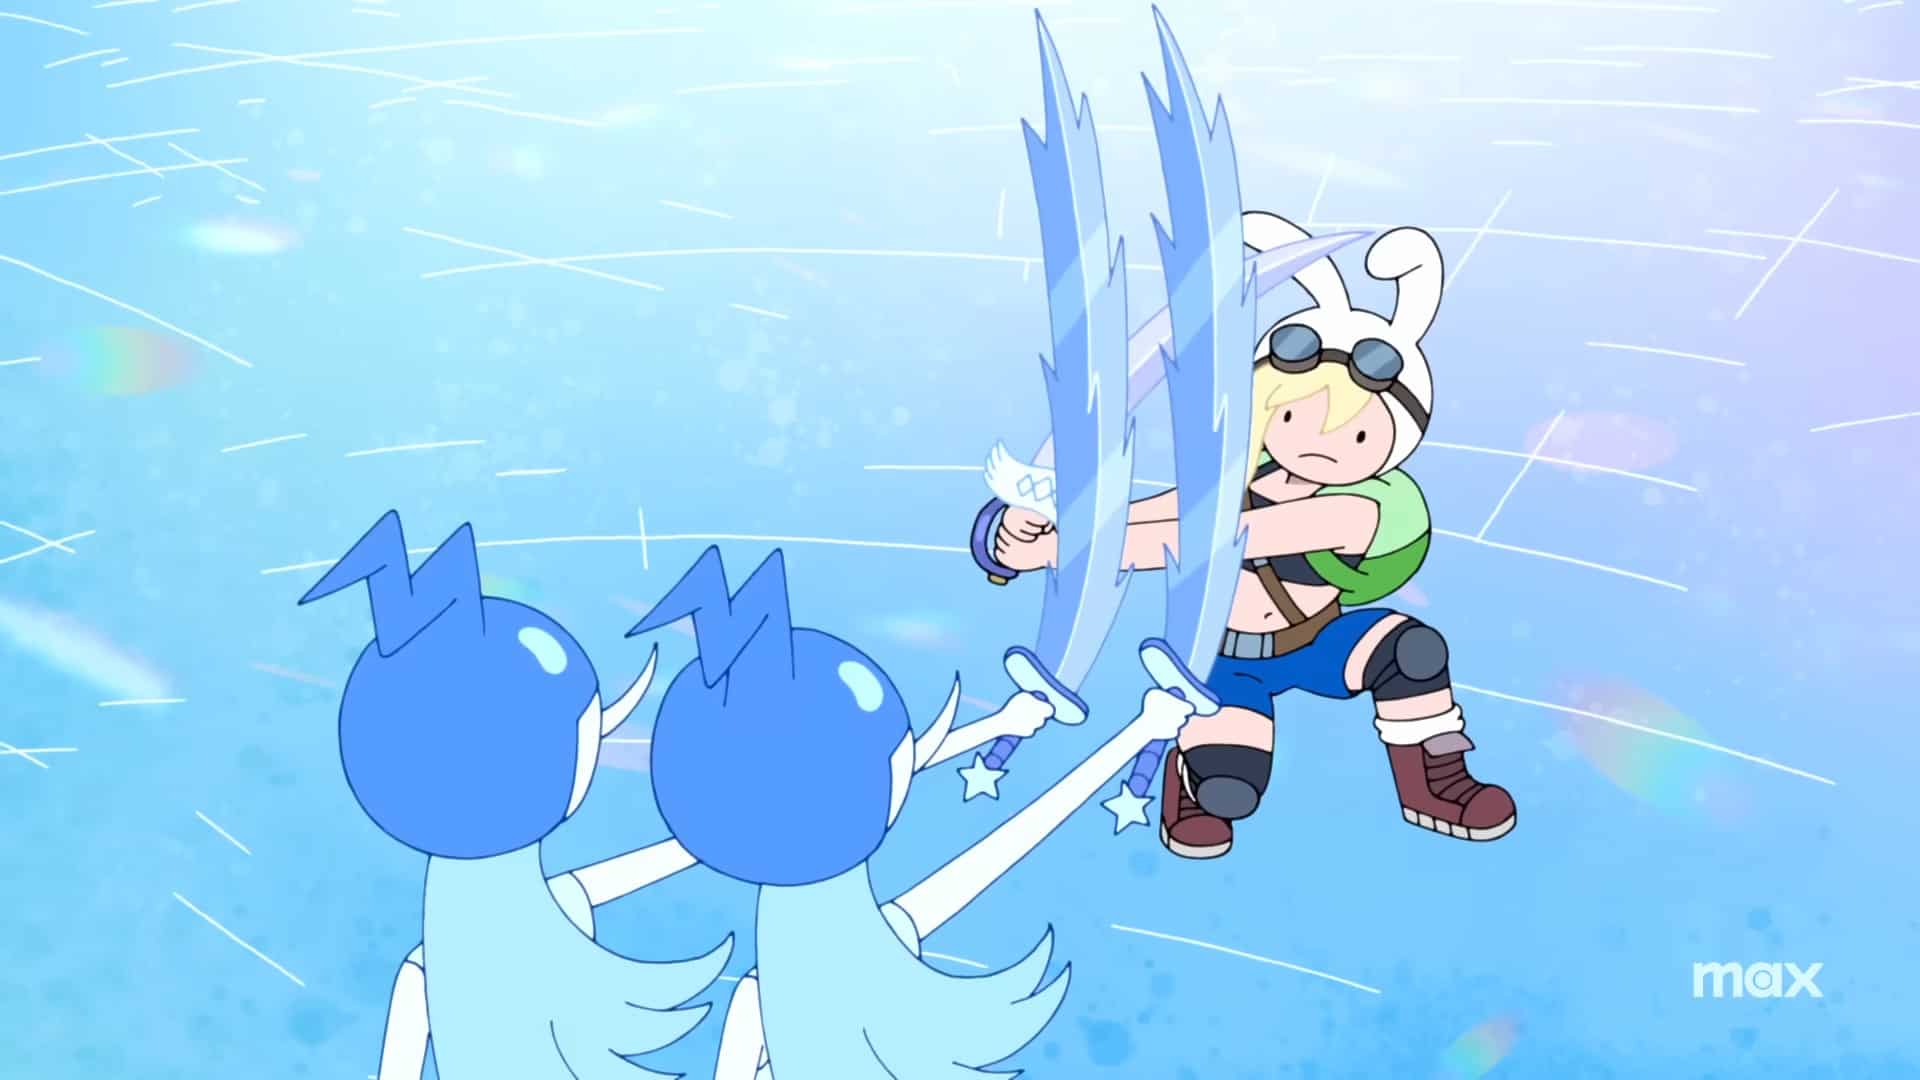 Adventure Time: Fionna and Cake Episode 1 Release Date, Spoilers, and Streaming Guide